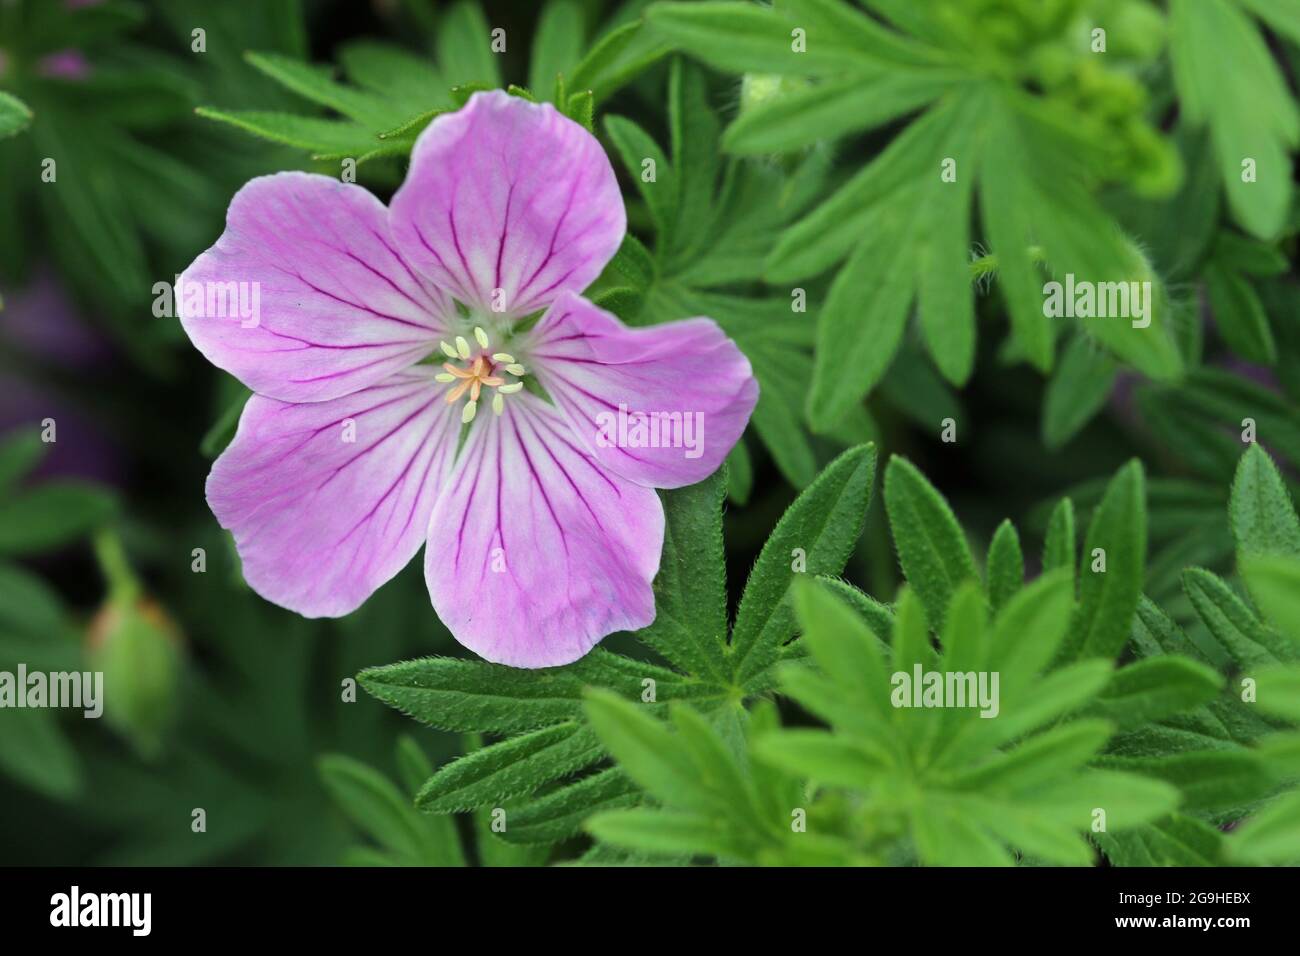 Pink bloody cranesbill, Geranium sanguineum variety Canon Miles, flower close up with a background of blurred leaves. Stock Photo